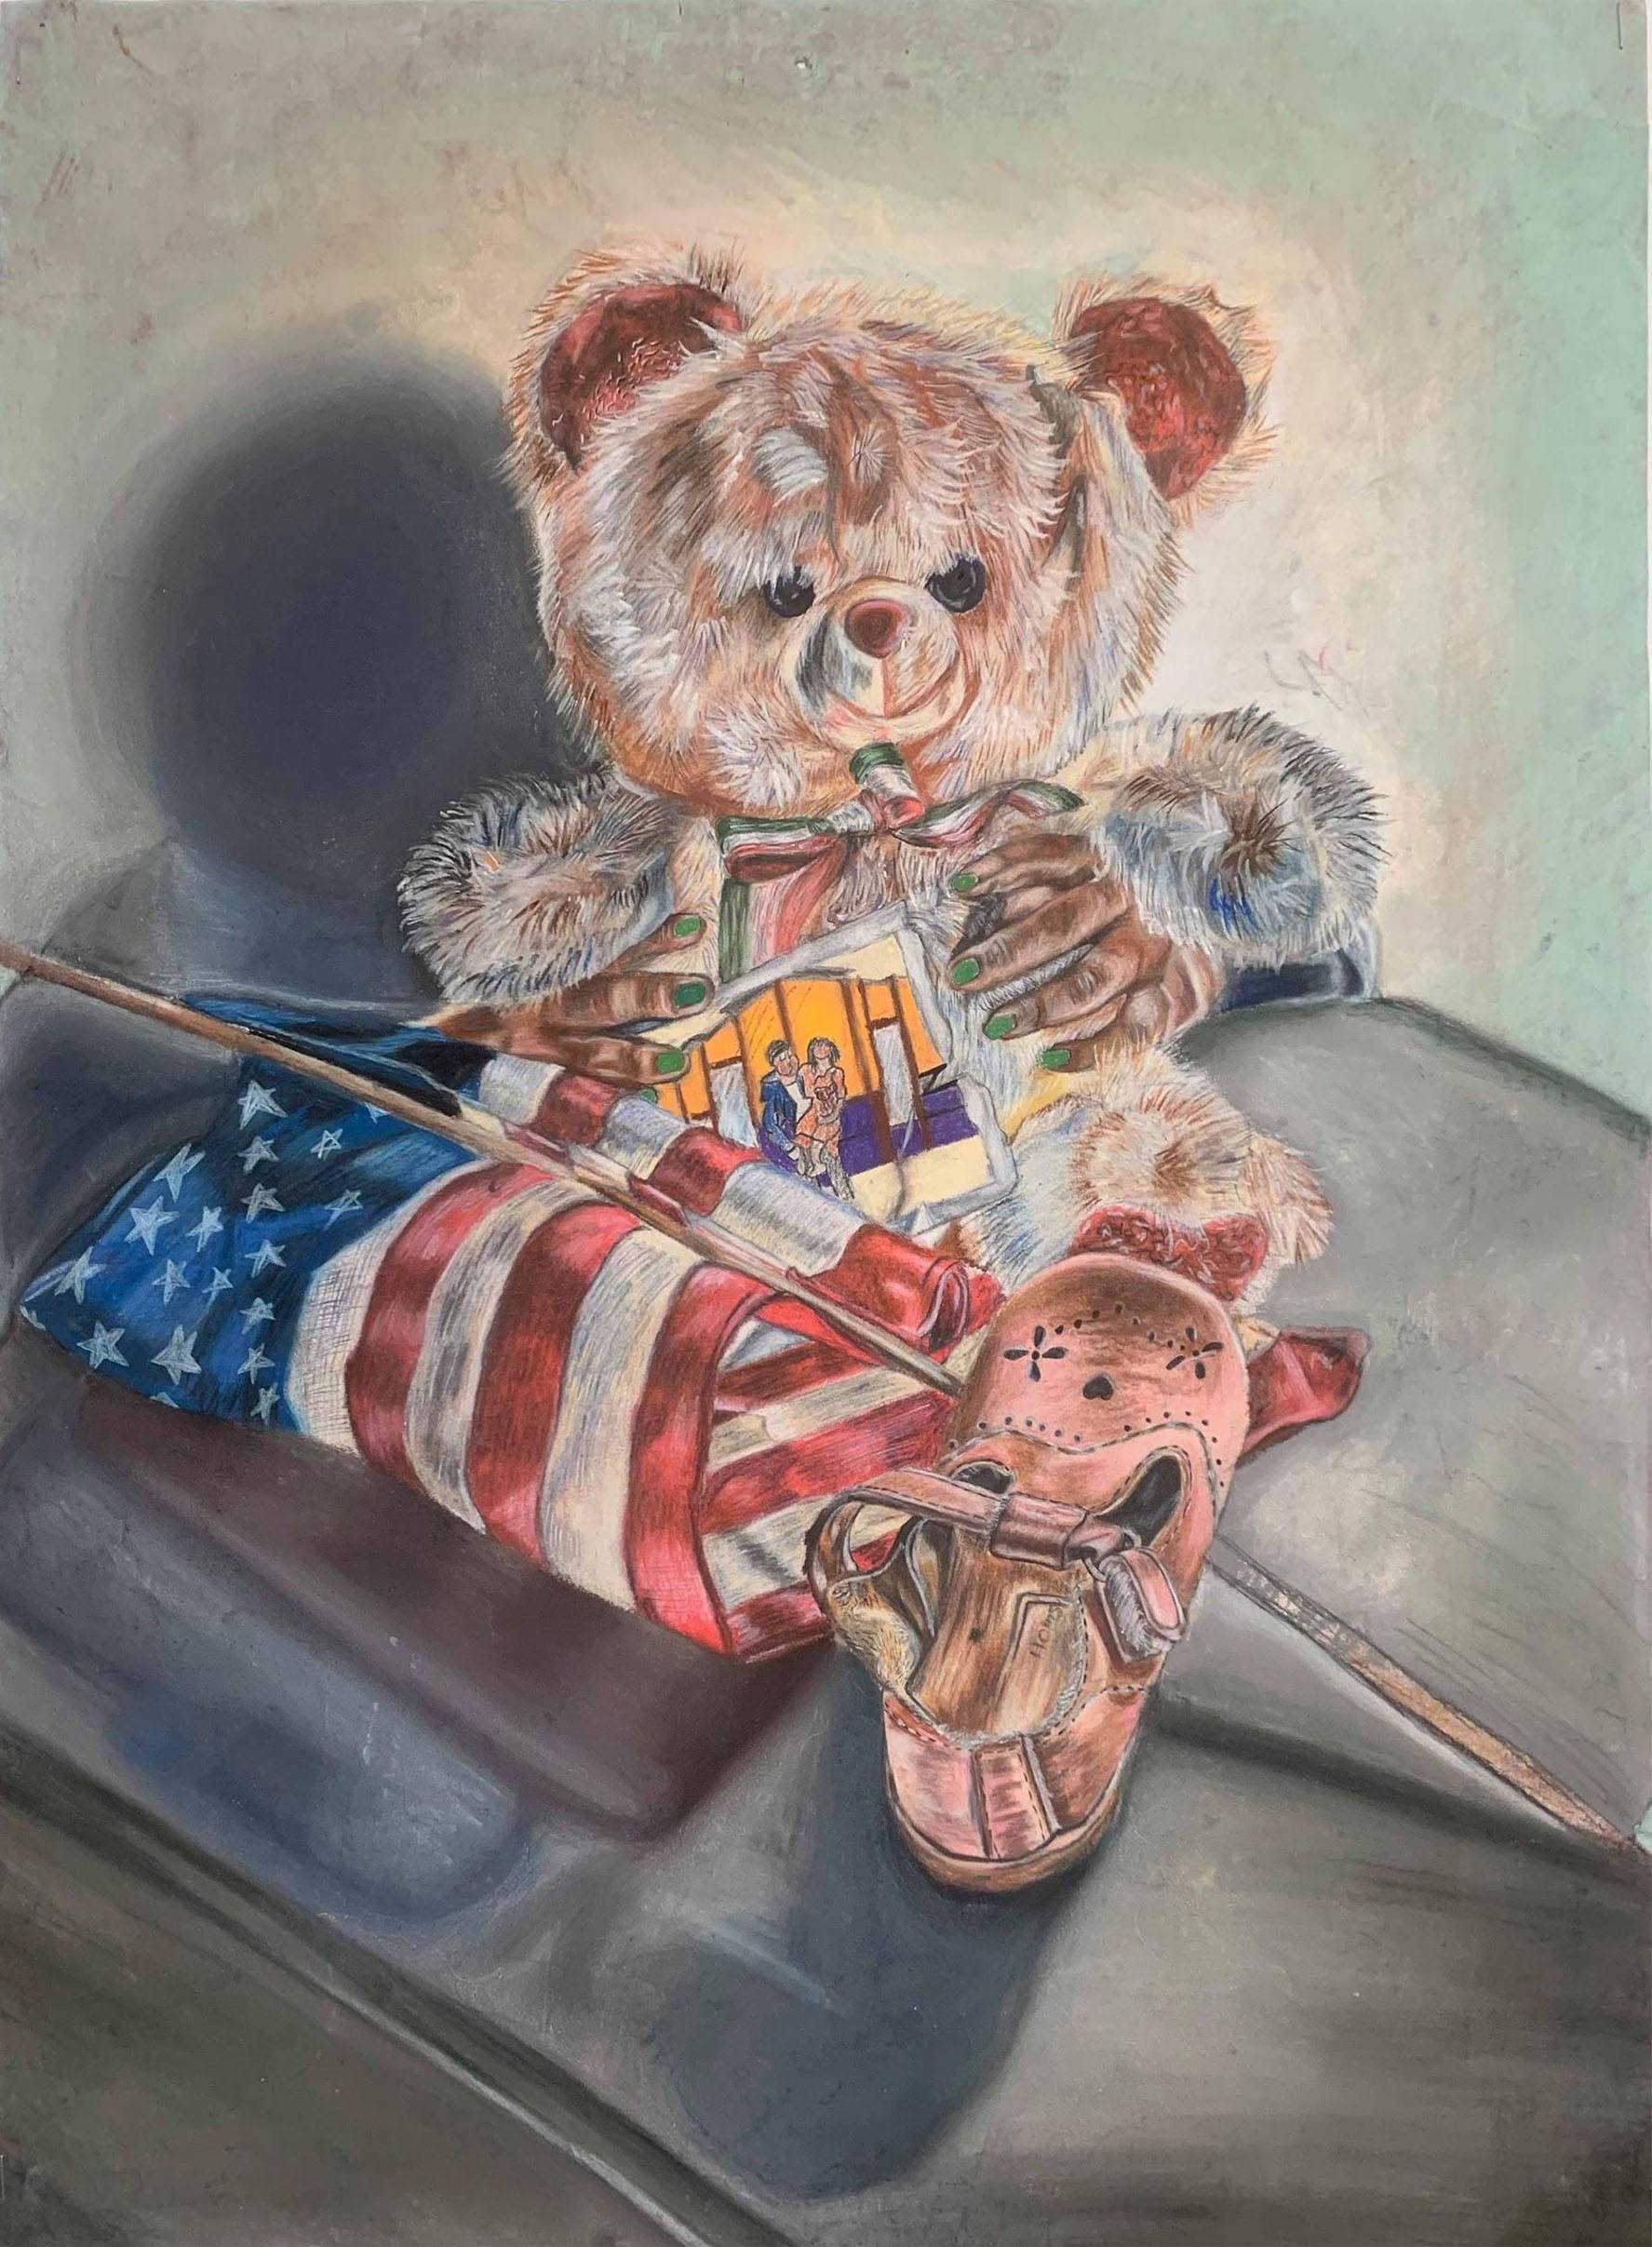 An illustration of hands holding a teddy bear with other assorted items